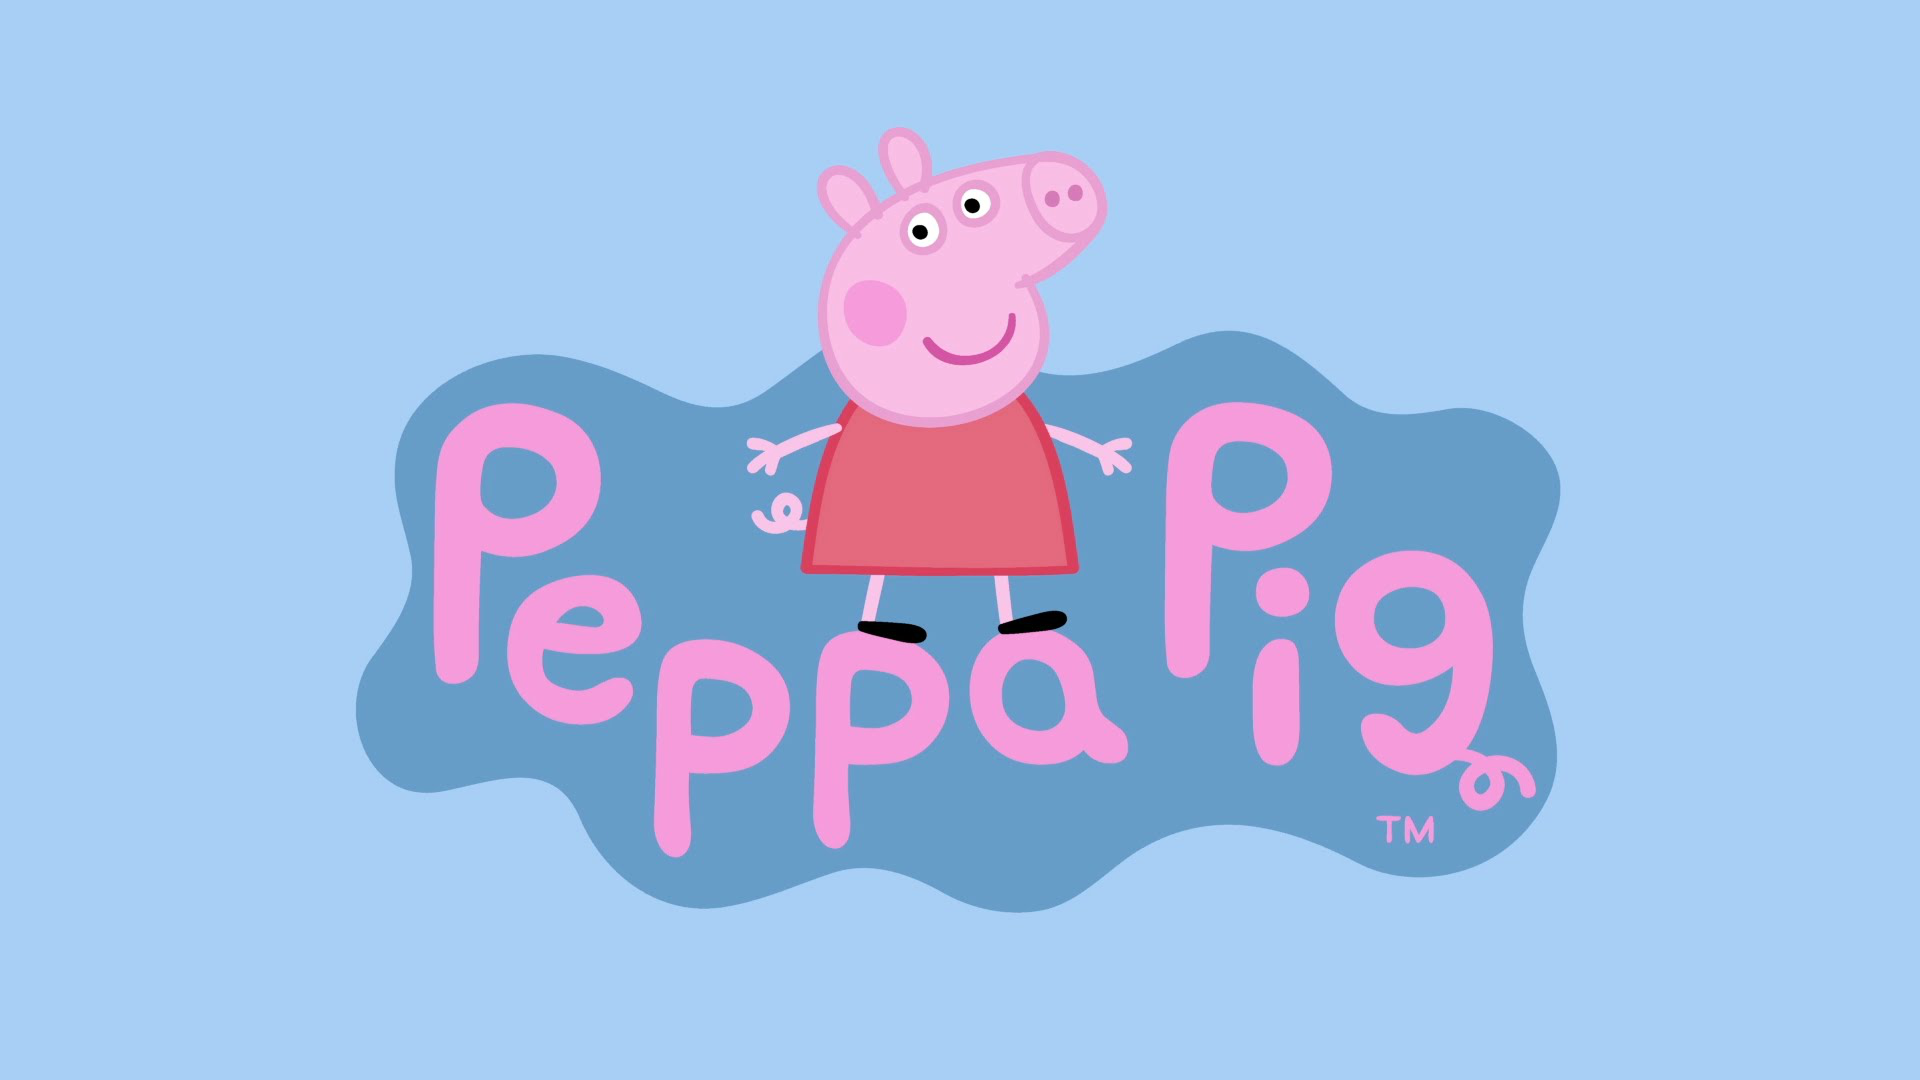 Peppa Pig US Dub: "Mommy Pig at Work" - Peppa Pig (partially found American dub of Channel 5 animated series; 2005-2007)